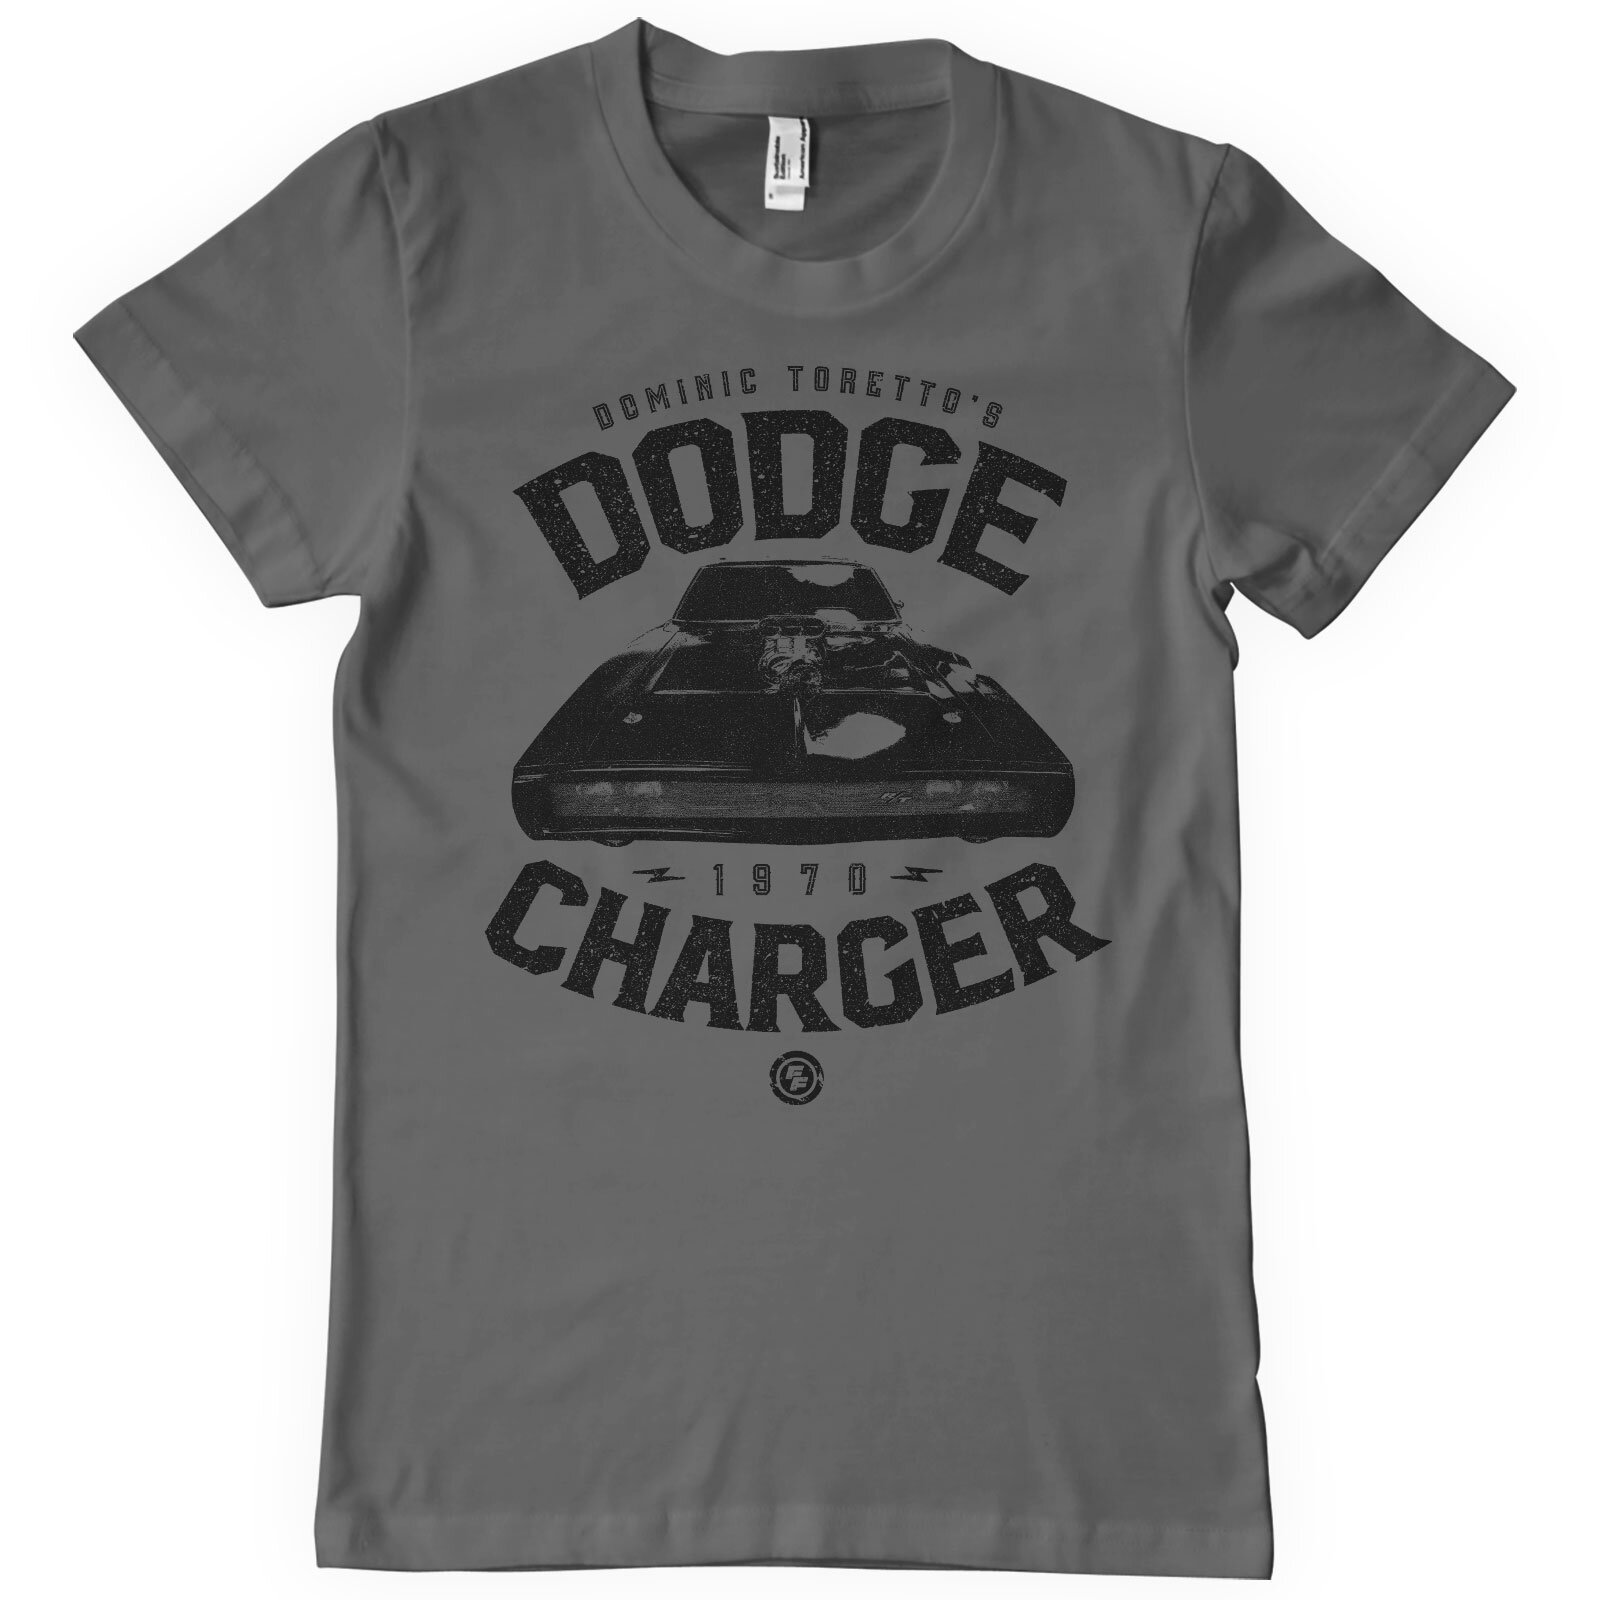 Toretto's Dodge Charger T-Shirt